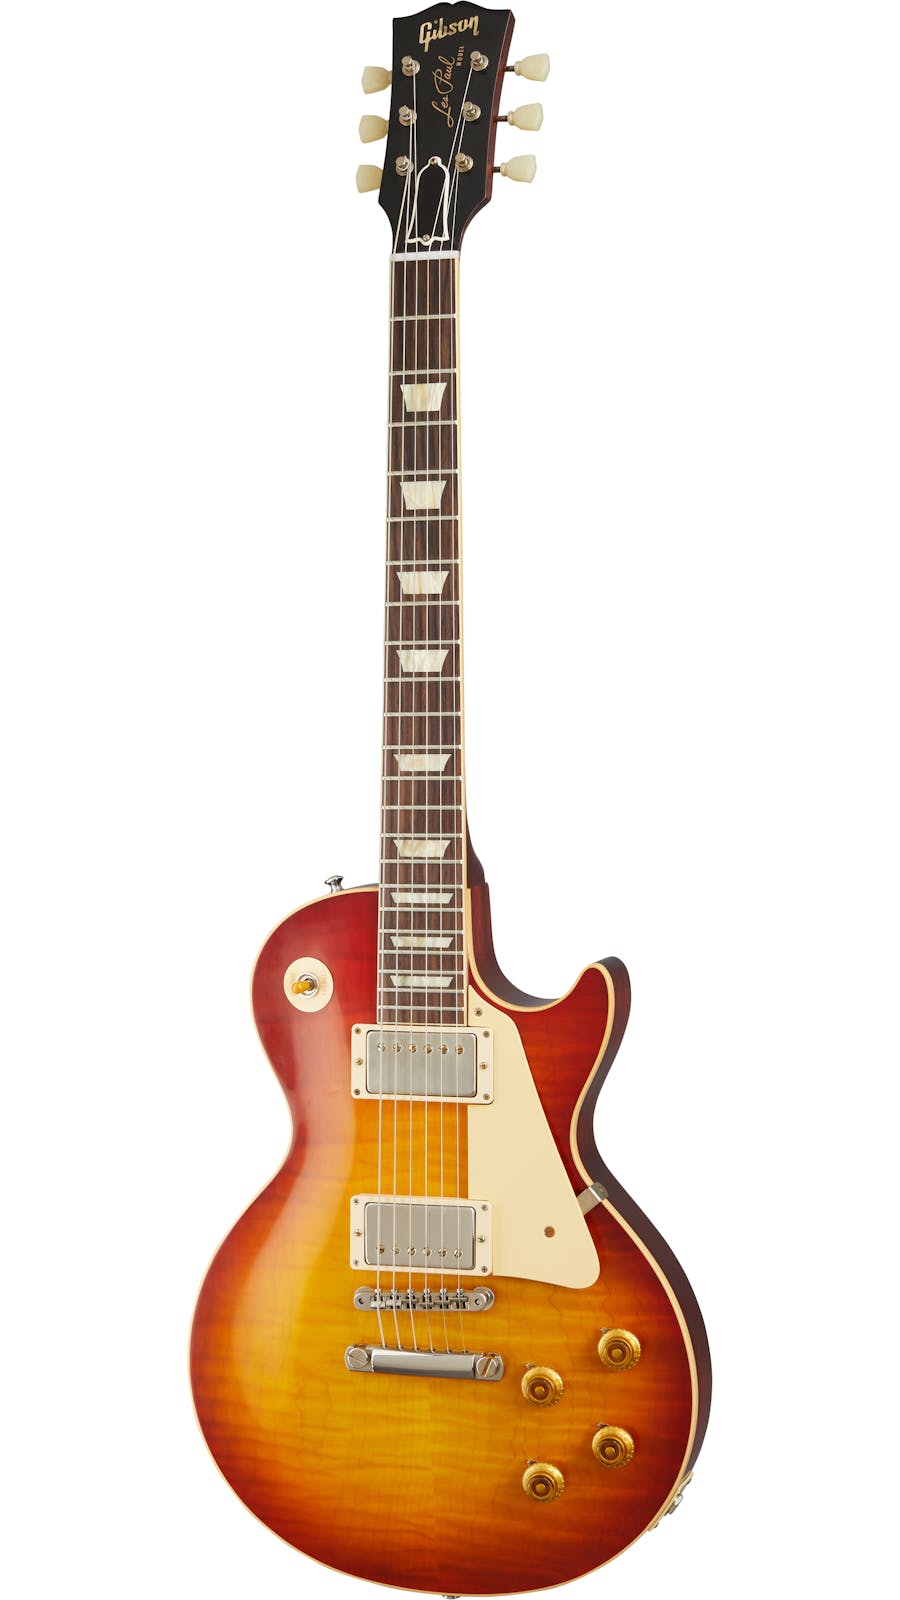 Gibson 1959 Les Paul Standard Reissue VOS Electric Guitar, Washed Cherry Sunburst